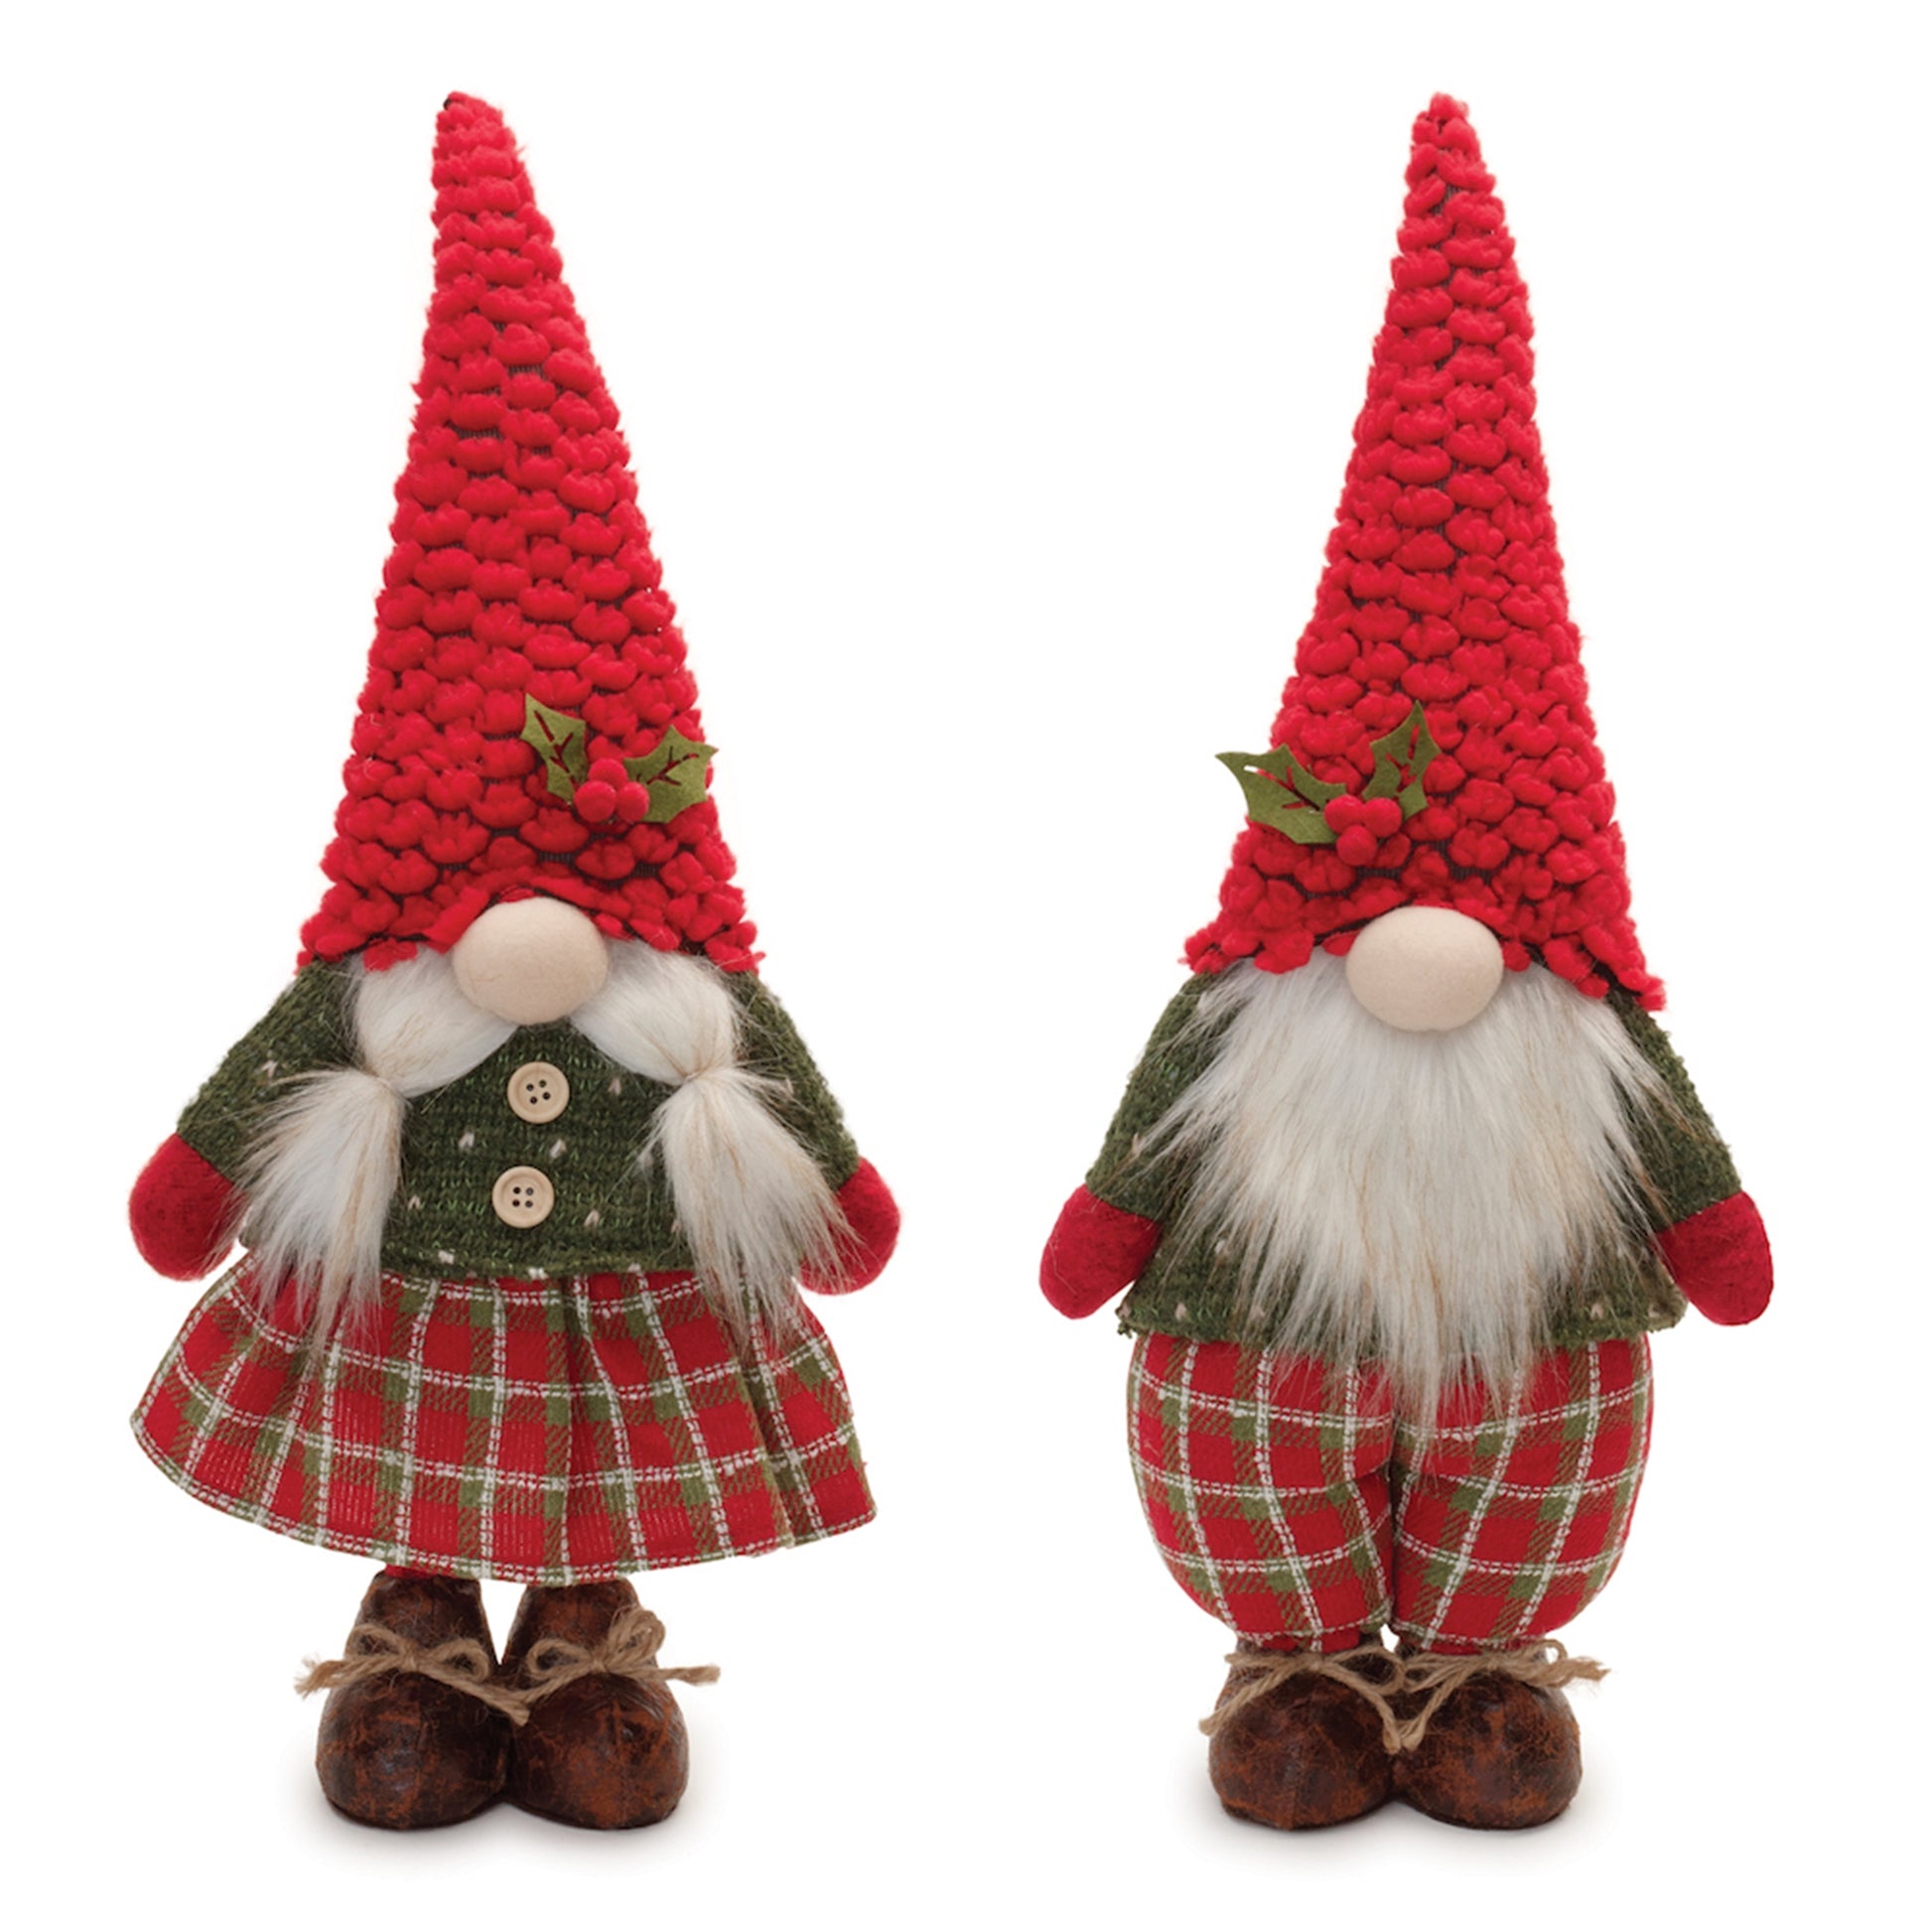 2 gnomes with red hats, green sweaters, and brown boots, one is wearing a red plaid skirt and has ponytails, the other is wearing red plaid pants and has a bread.